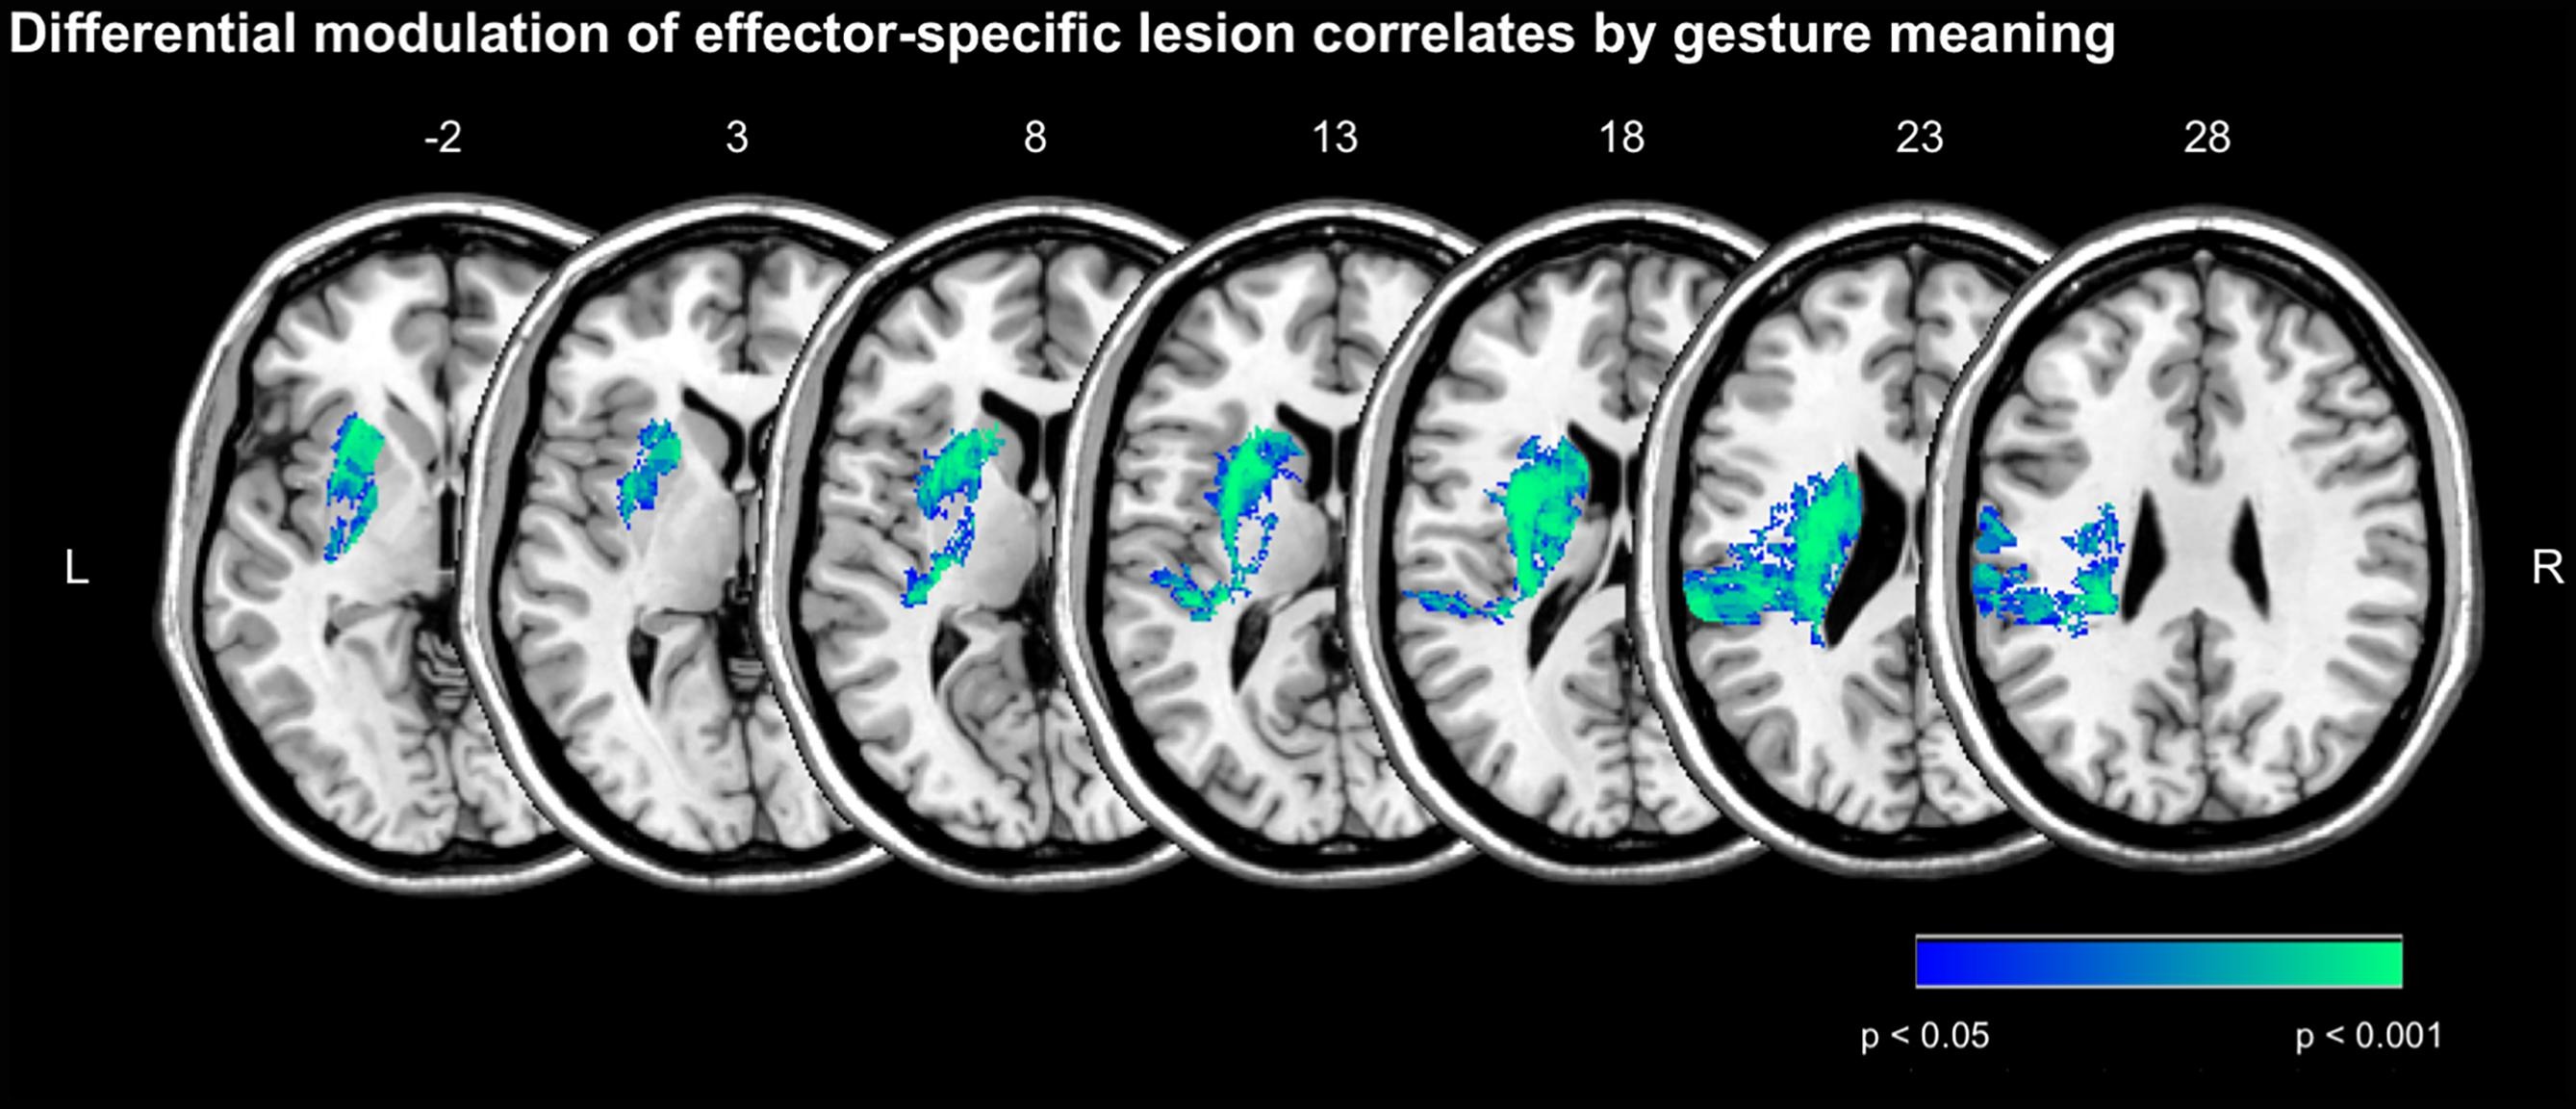 Gesture meaning modulates the neural correlates of effector-specific imitation deficits in left hemisphere stroke